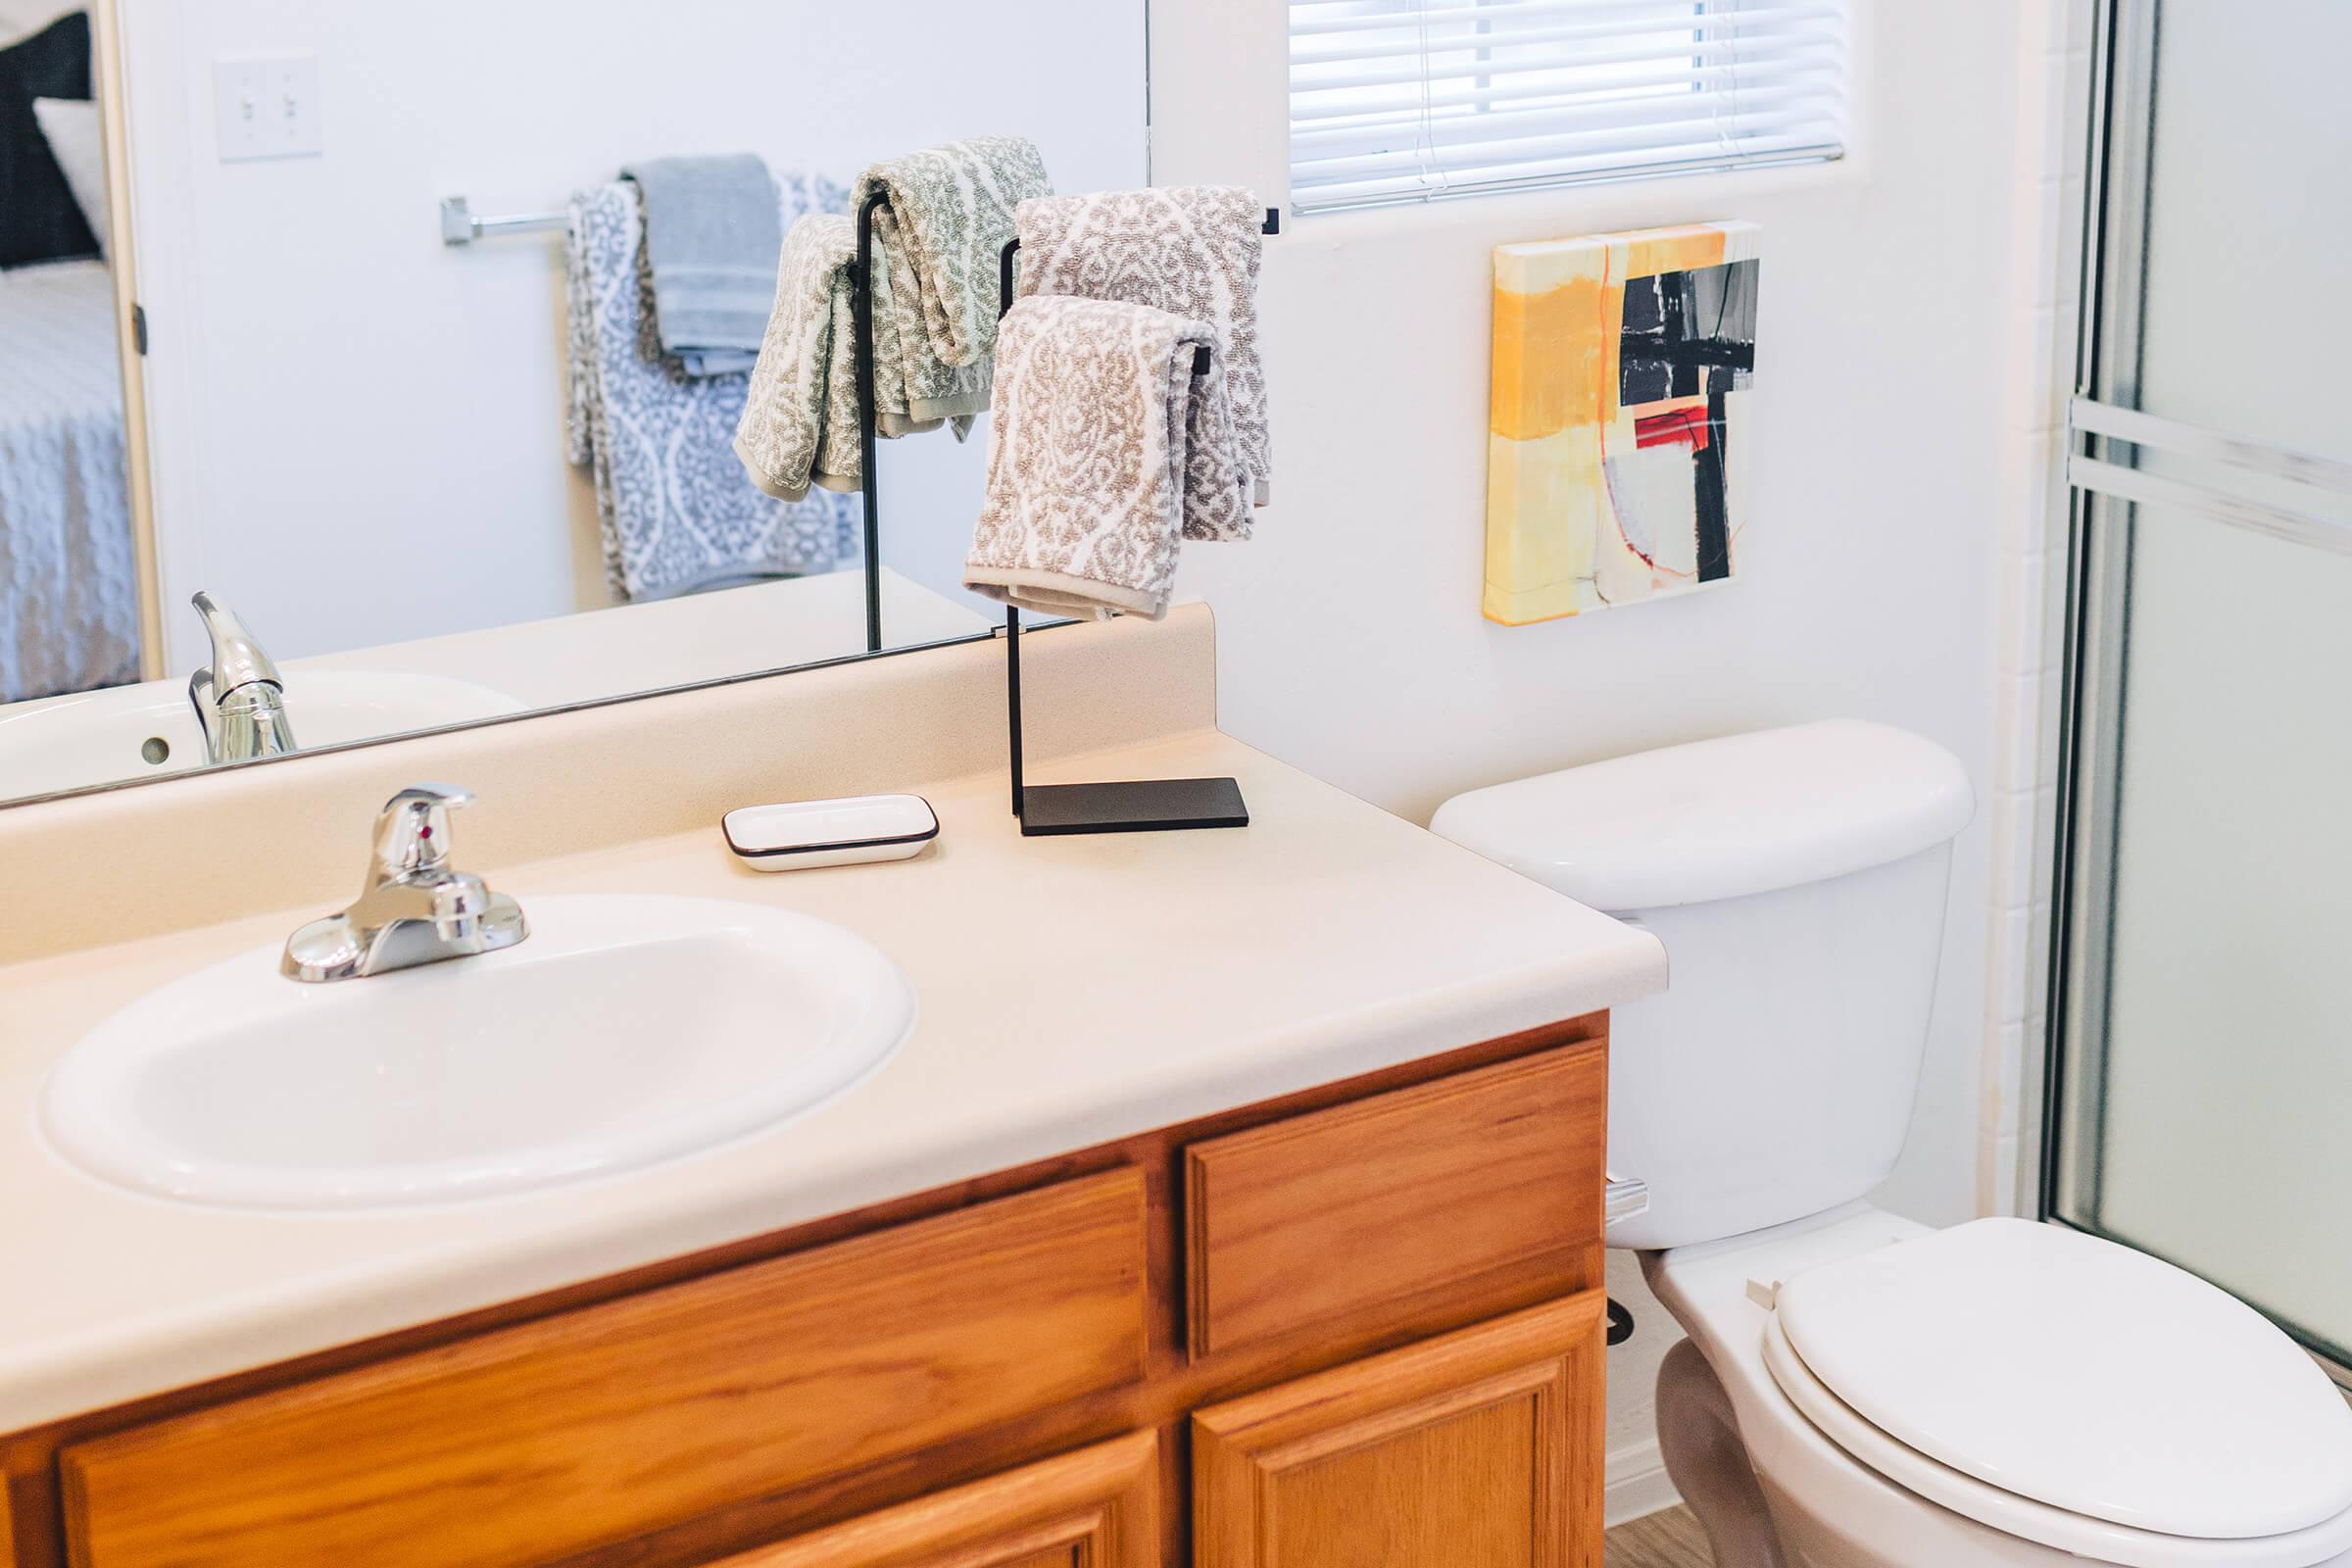 furnished bathroom with tan countertops